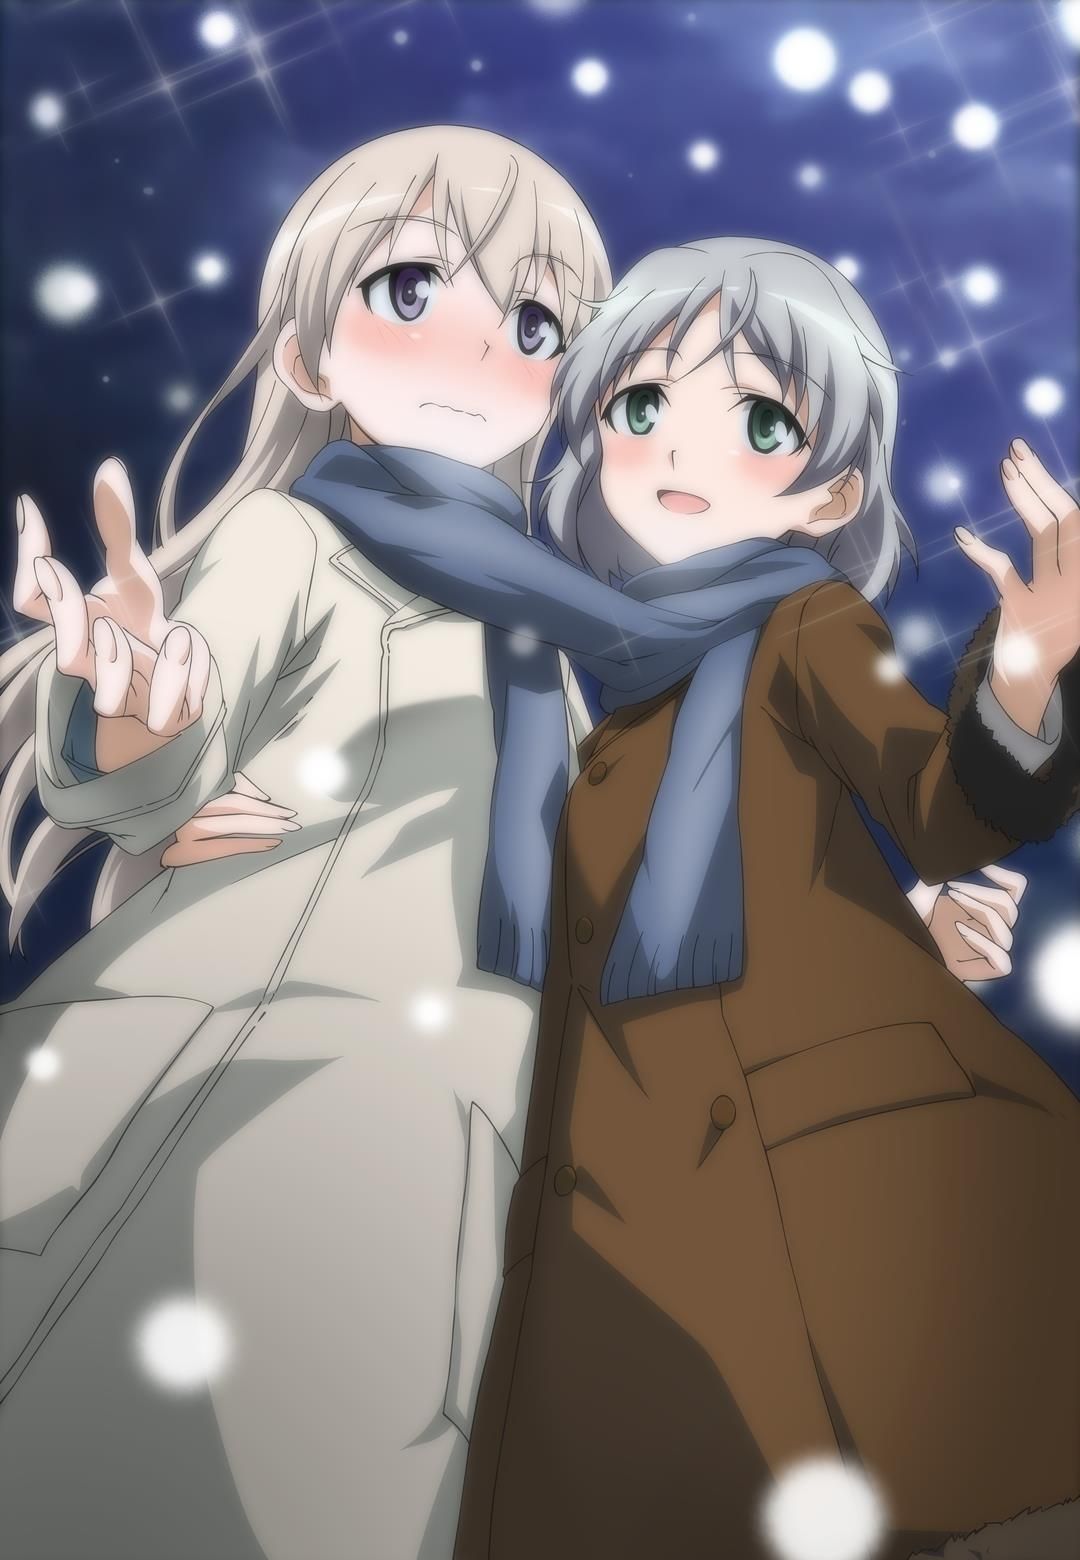 [Image] to double cute girl's winter right [secondary] 5